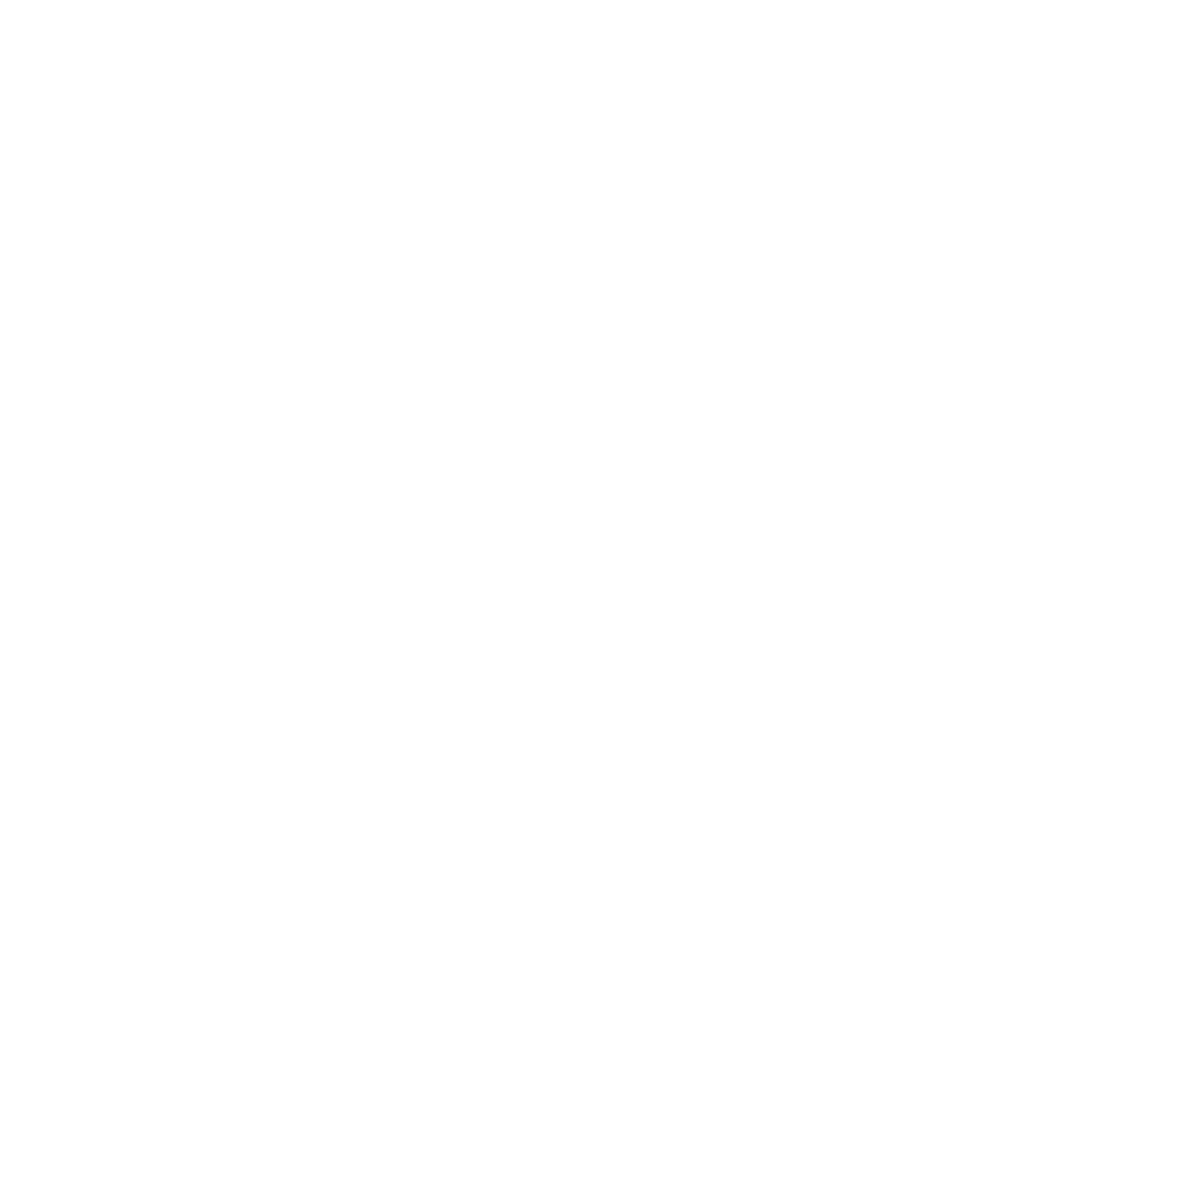 Coca-Cola Europacific Partners addresses skills gaps with Eightfold